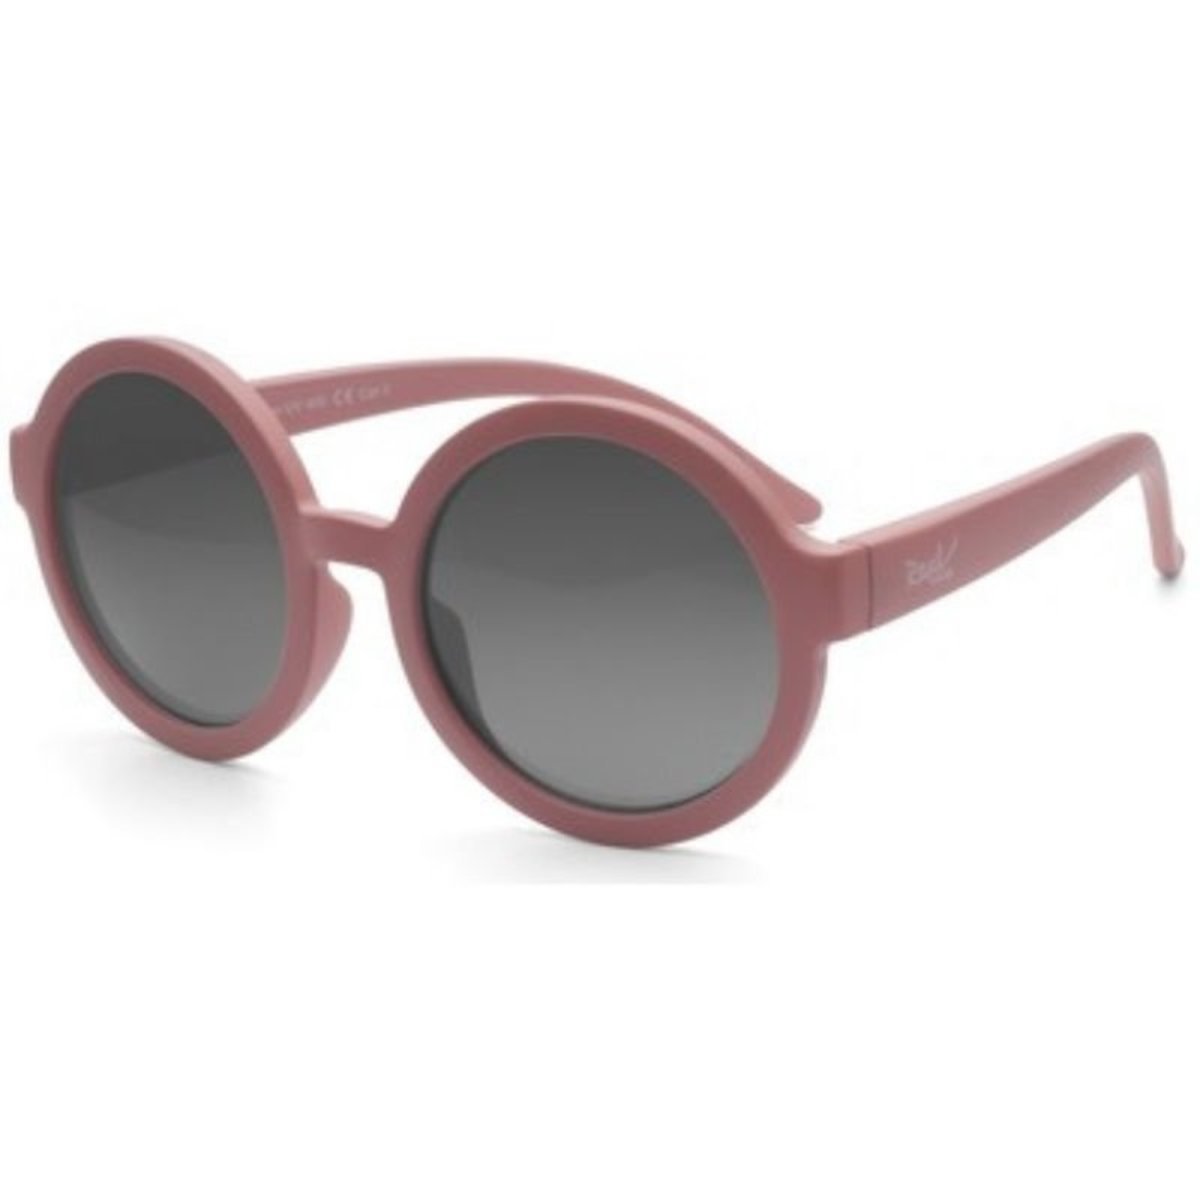 Real Shades - UV-zonnebril voor kinderen - Vibe - Mat Mauve - maat Onesize (0-2yrs)